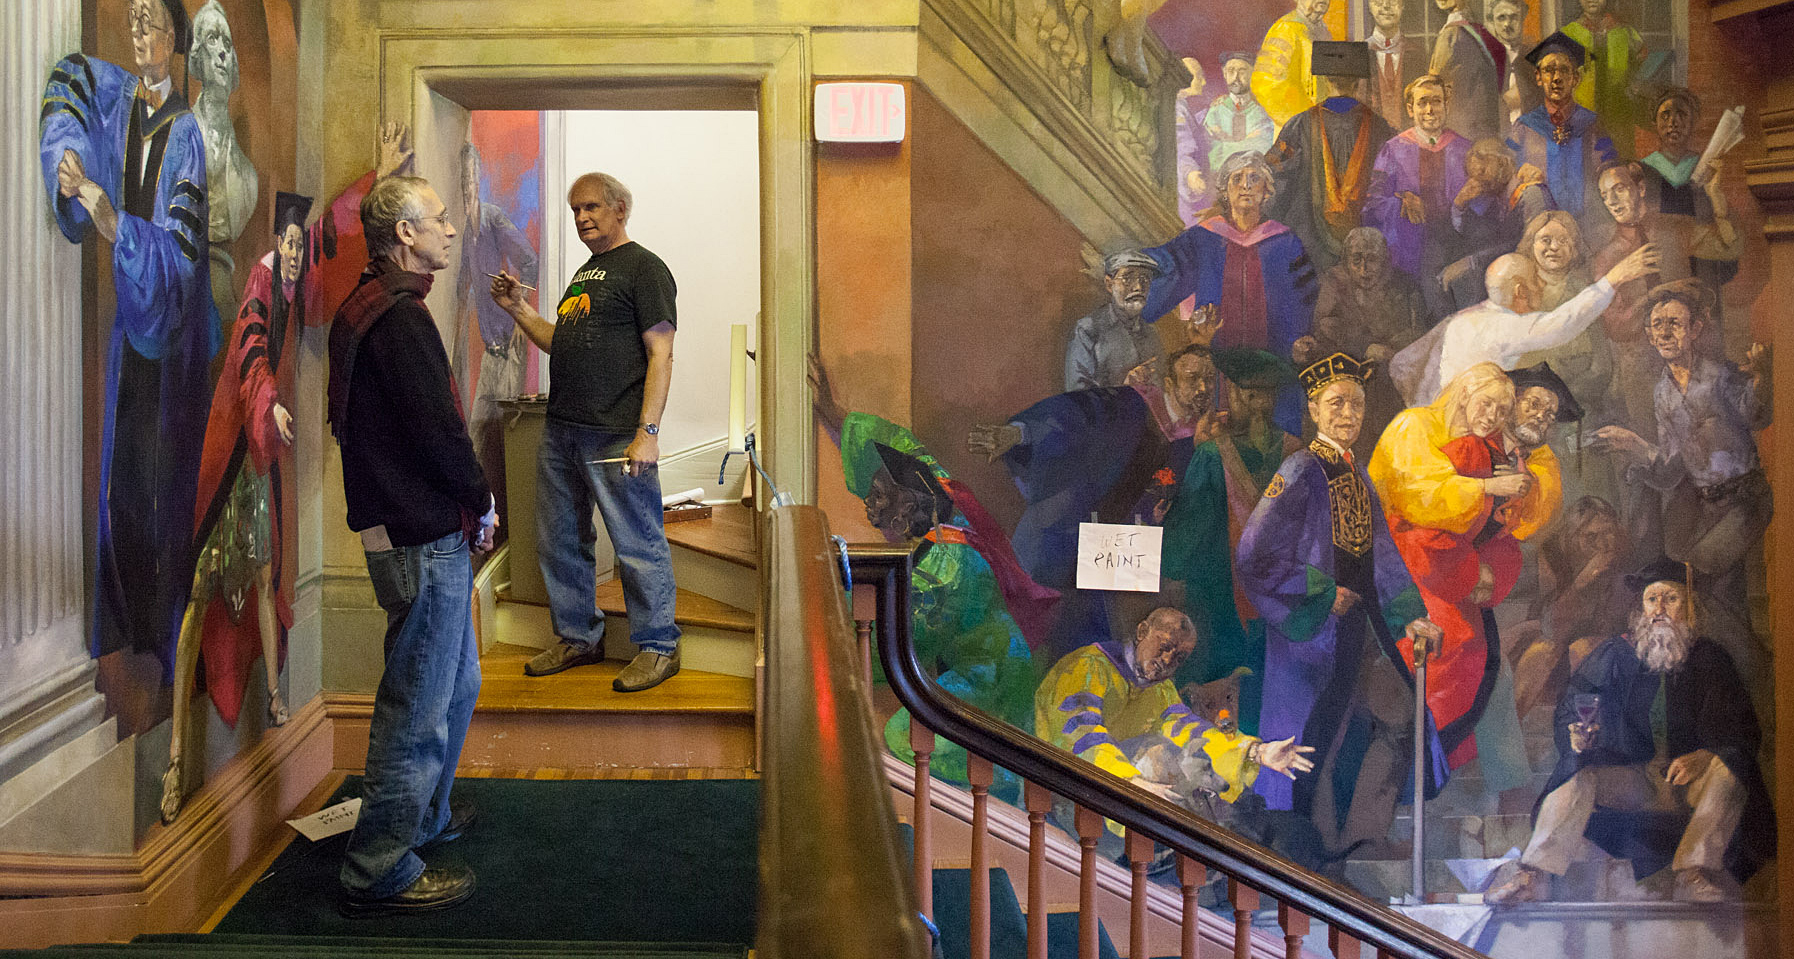 Artist painting a mural in Old Cabell Hall